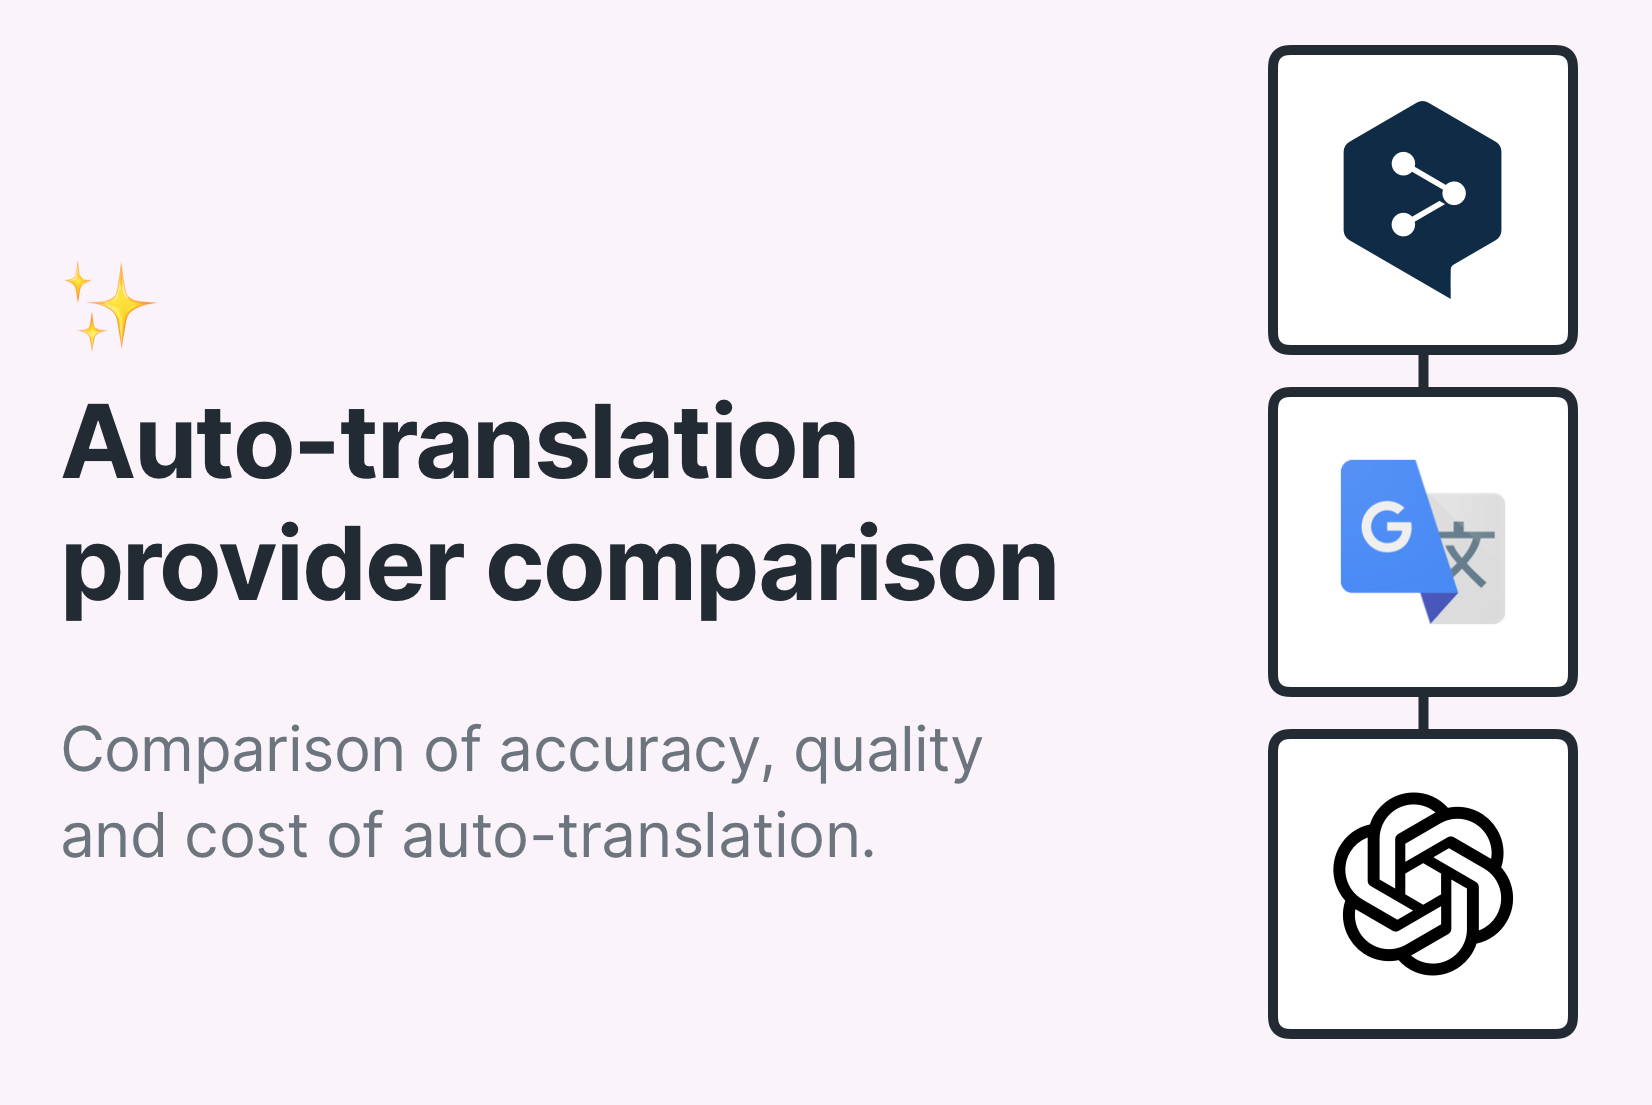 DeepL, Google Translate or OpenAI for auto-translation? Comparison with examples.